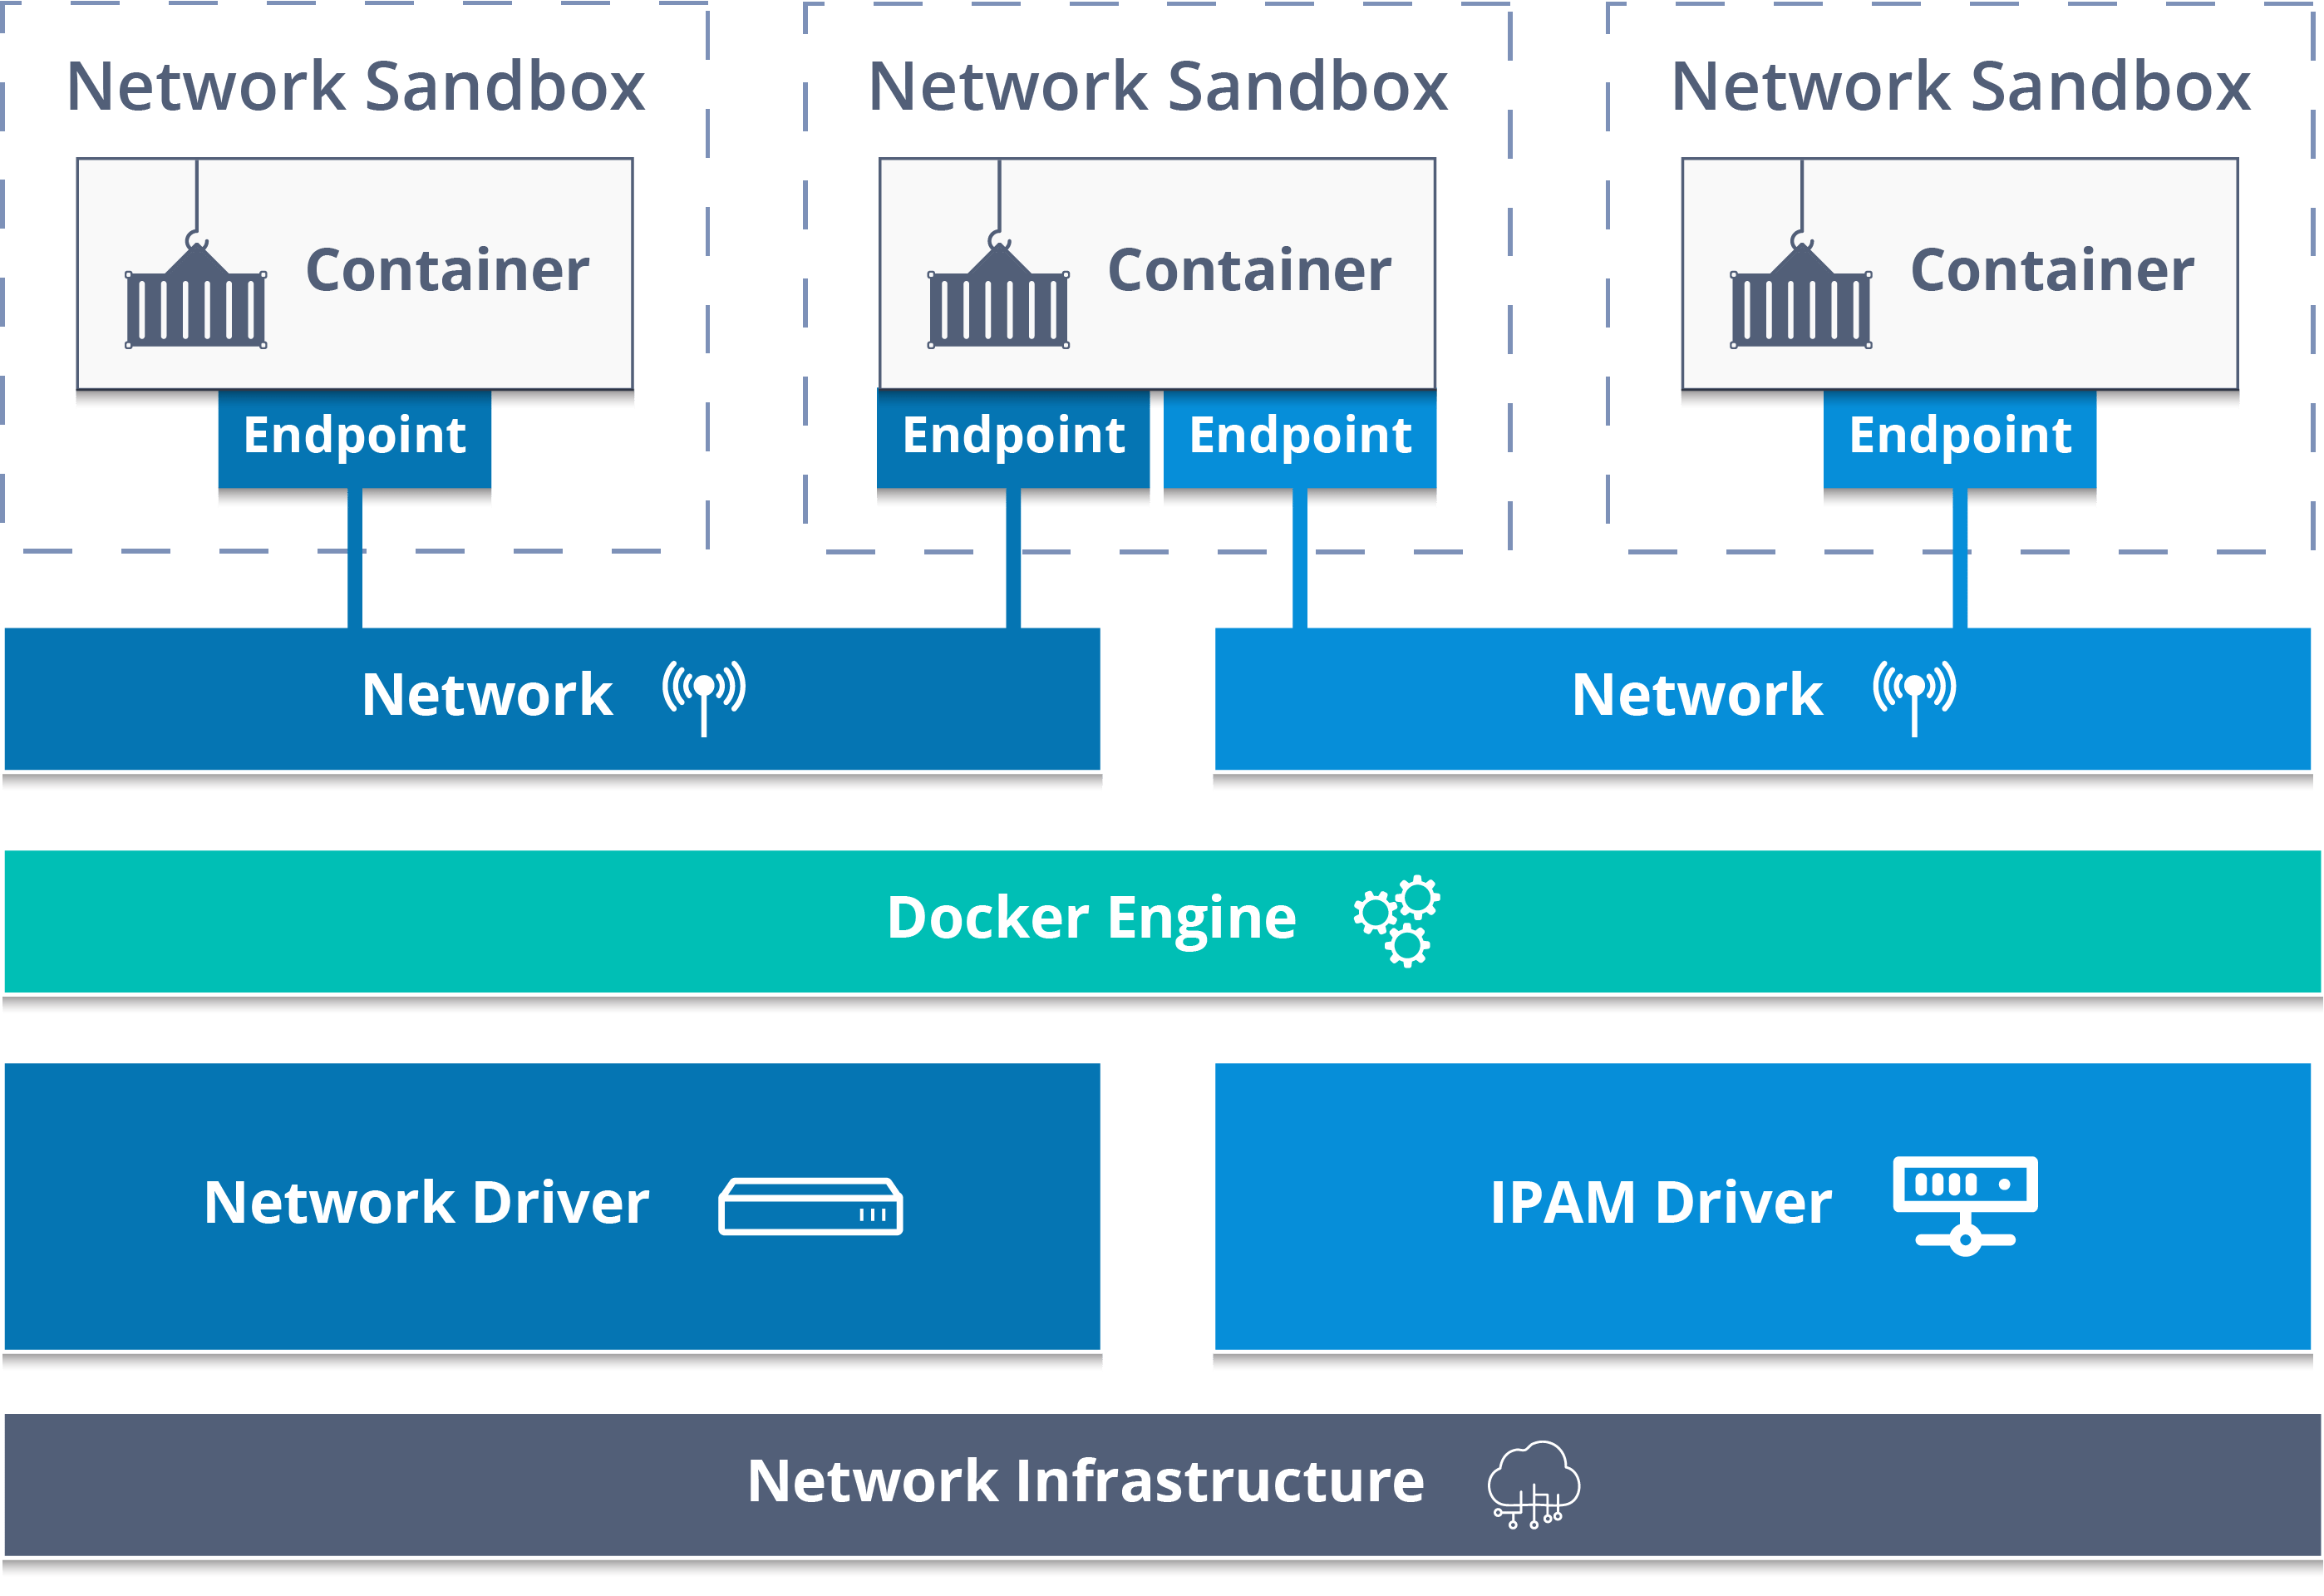 Container networking